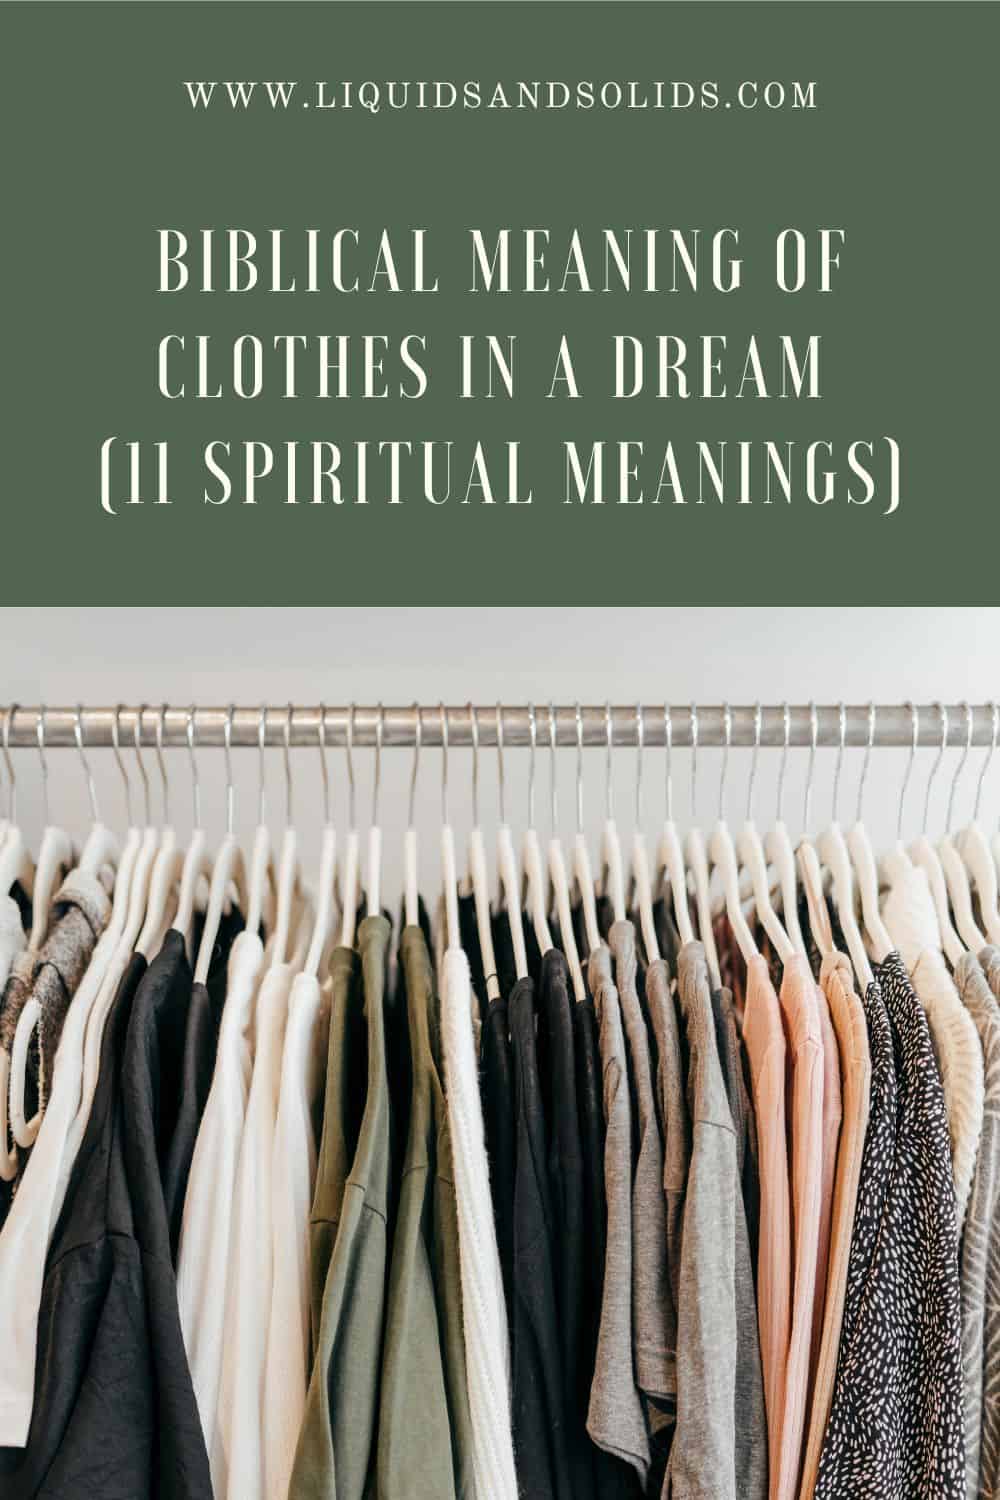 Biblical Meaning of Dreams about Clothes